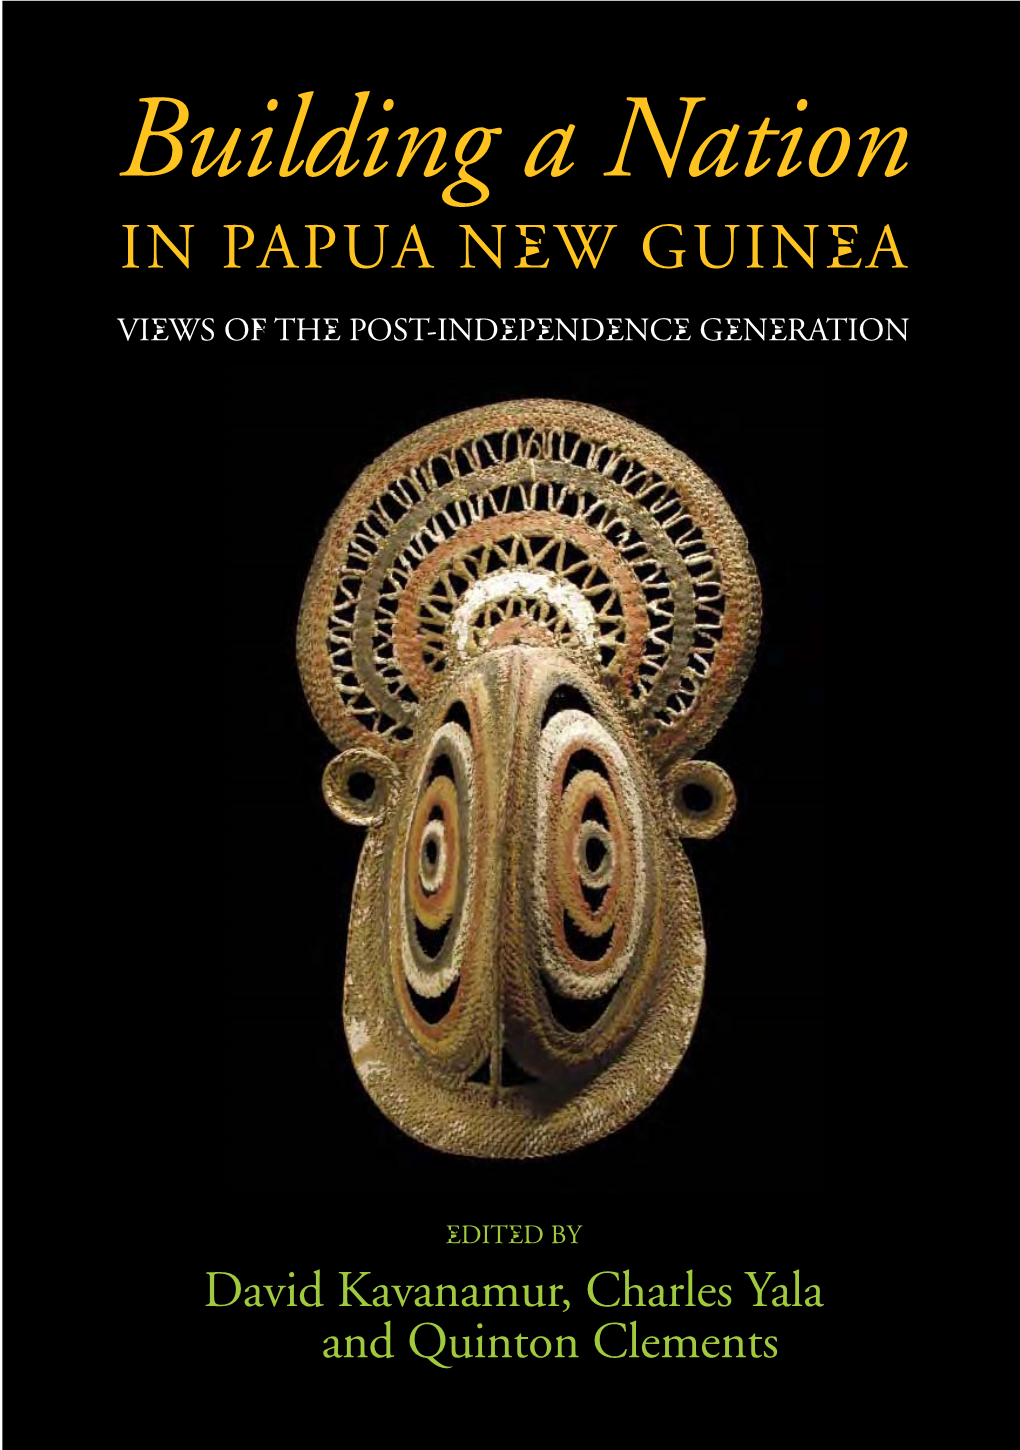 Building a Nation in PAPUA NEW GUINEA VIEWS of the POST-INDEPENDENCE GENERATION